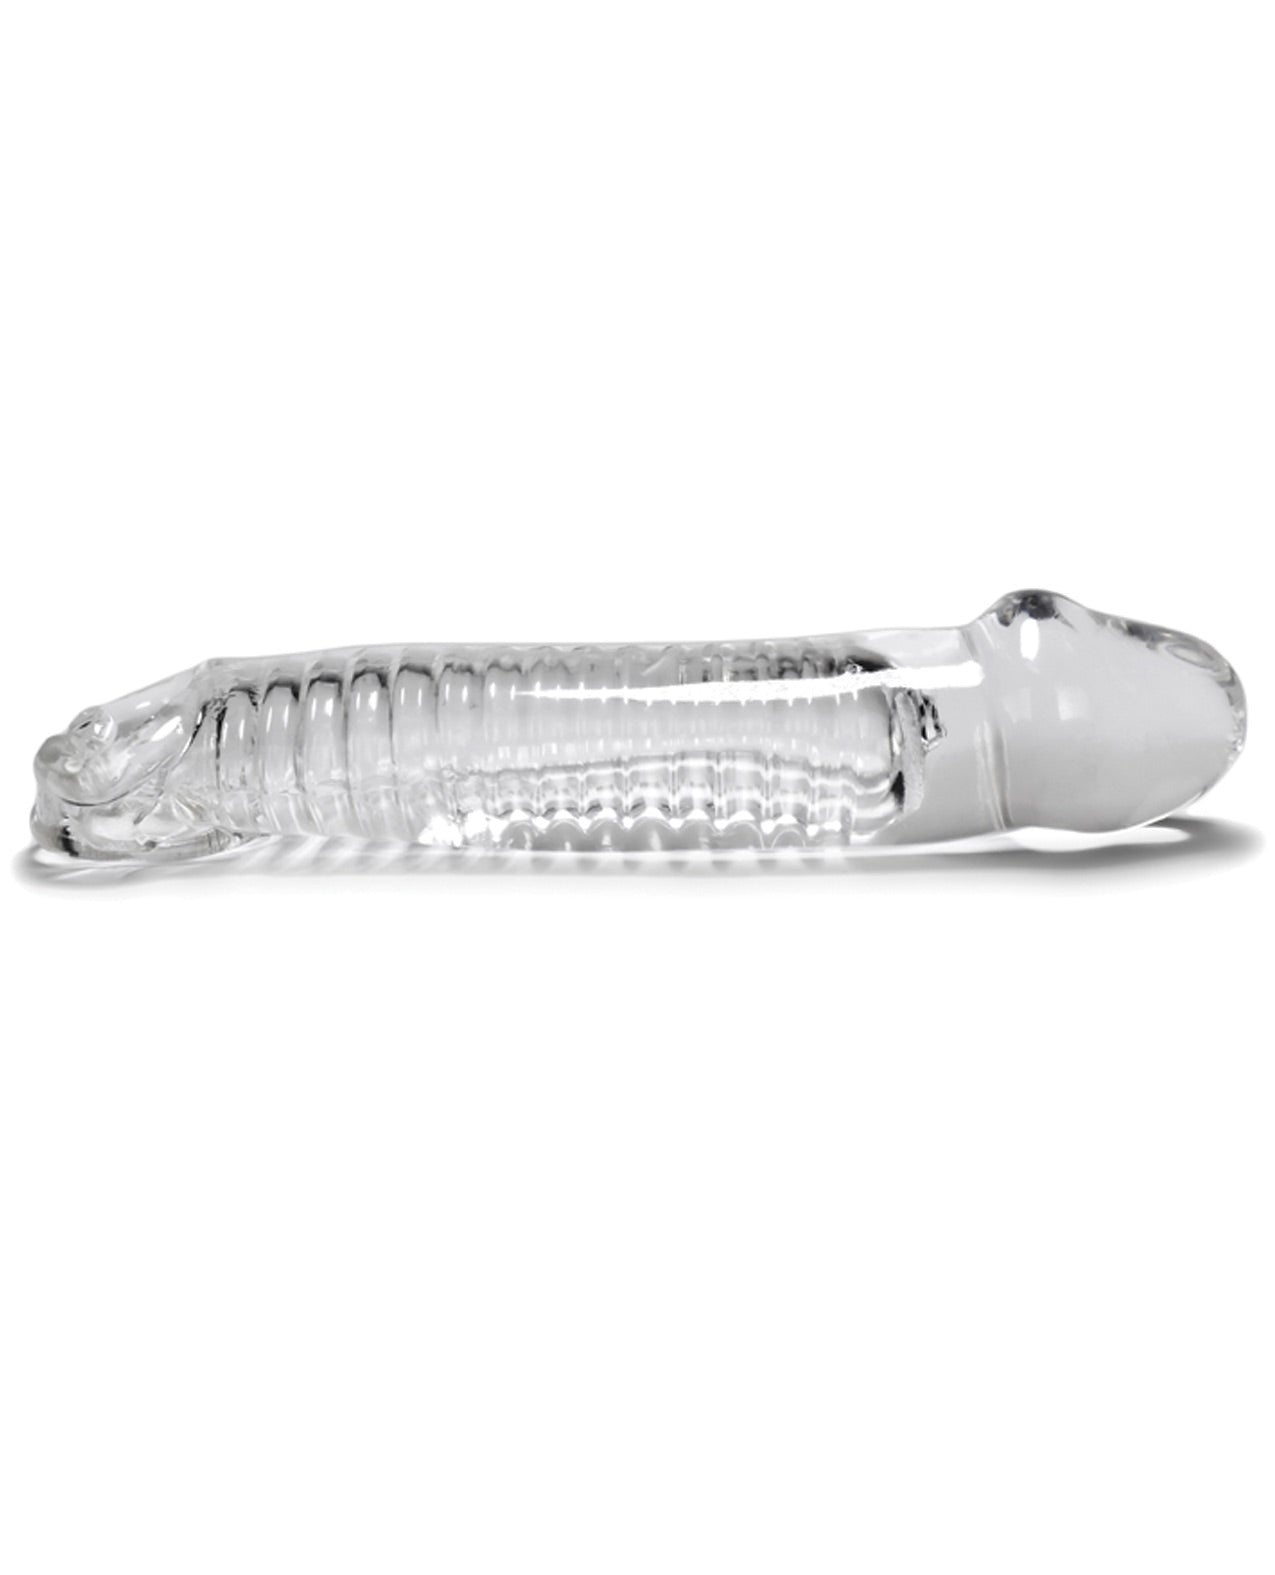 Oxballs Muscle Cock Sheath - Clear - LUST Depot